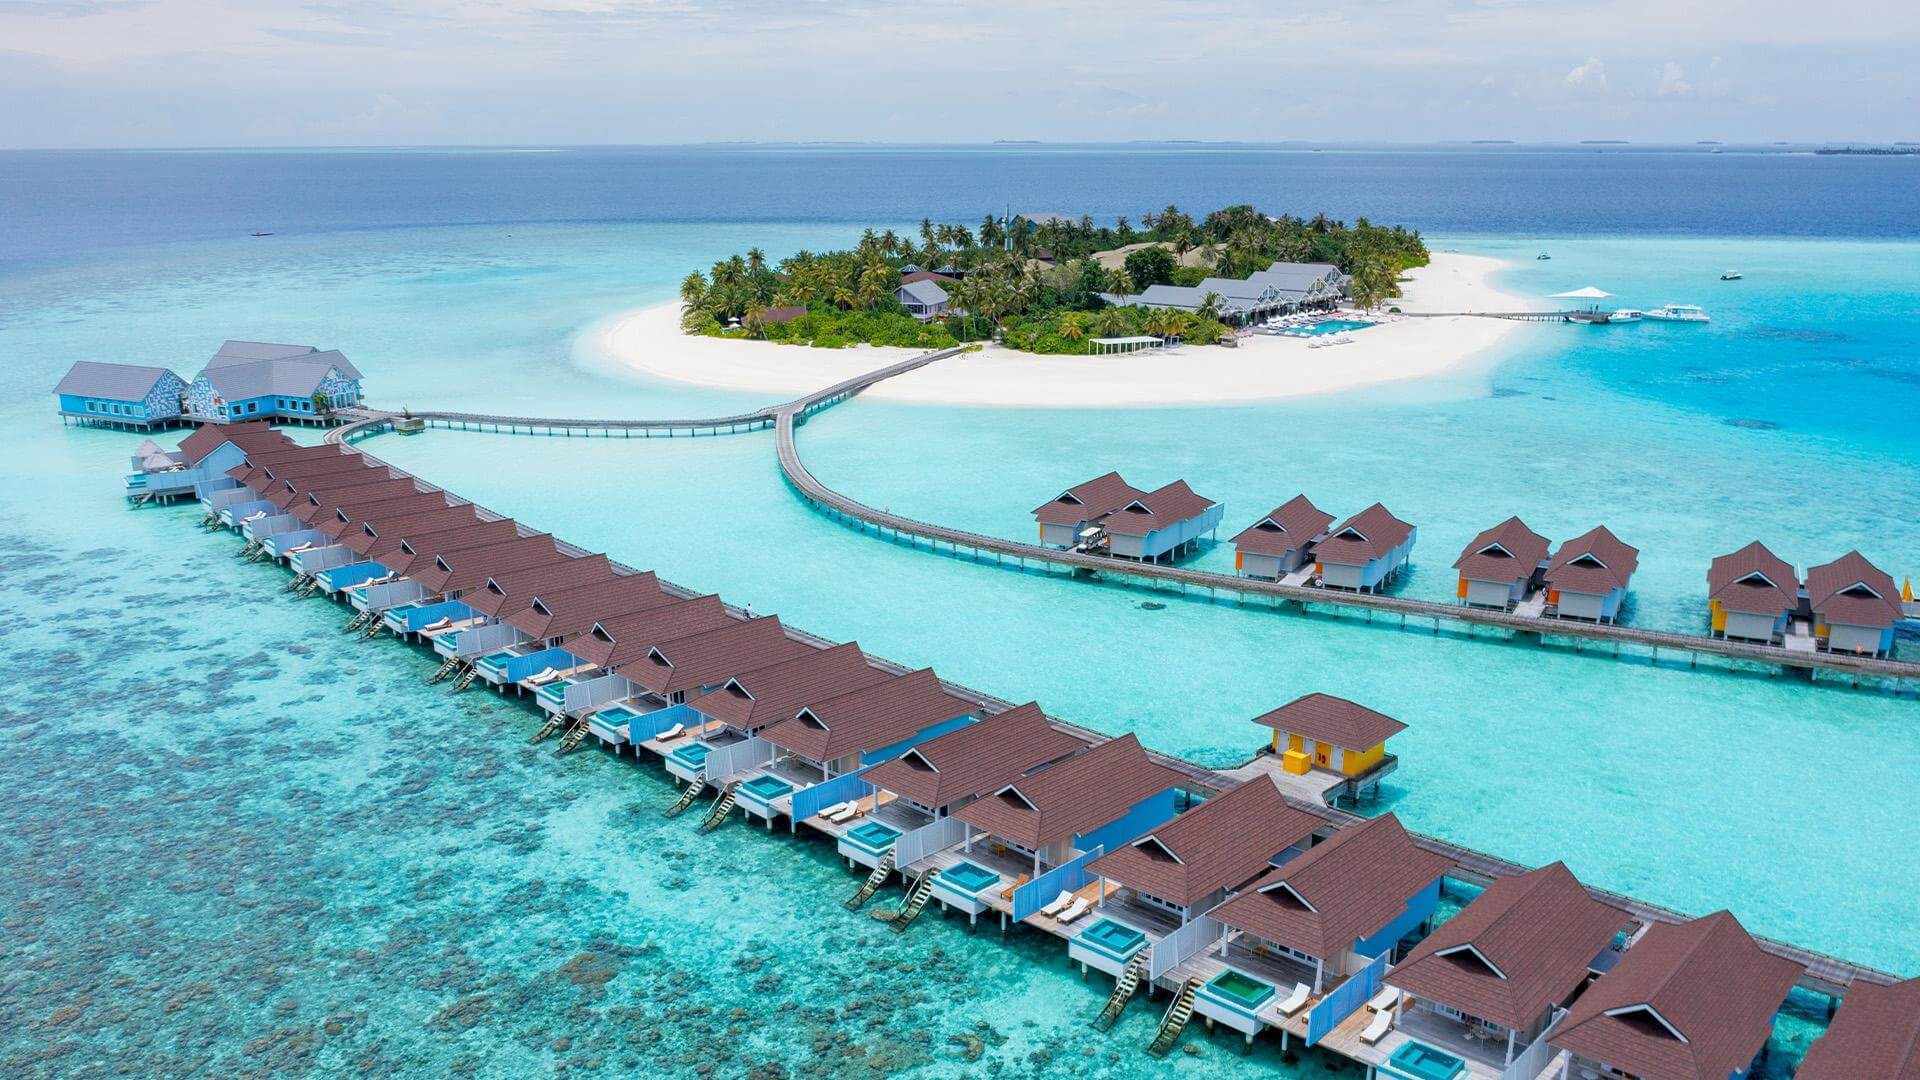 Discover the most stunning and Instagram-worthy locations in Maldives. From crystal clear waters to luxurious overwater bungalows, we've got you covered.